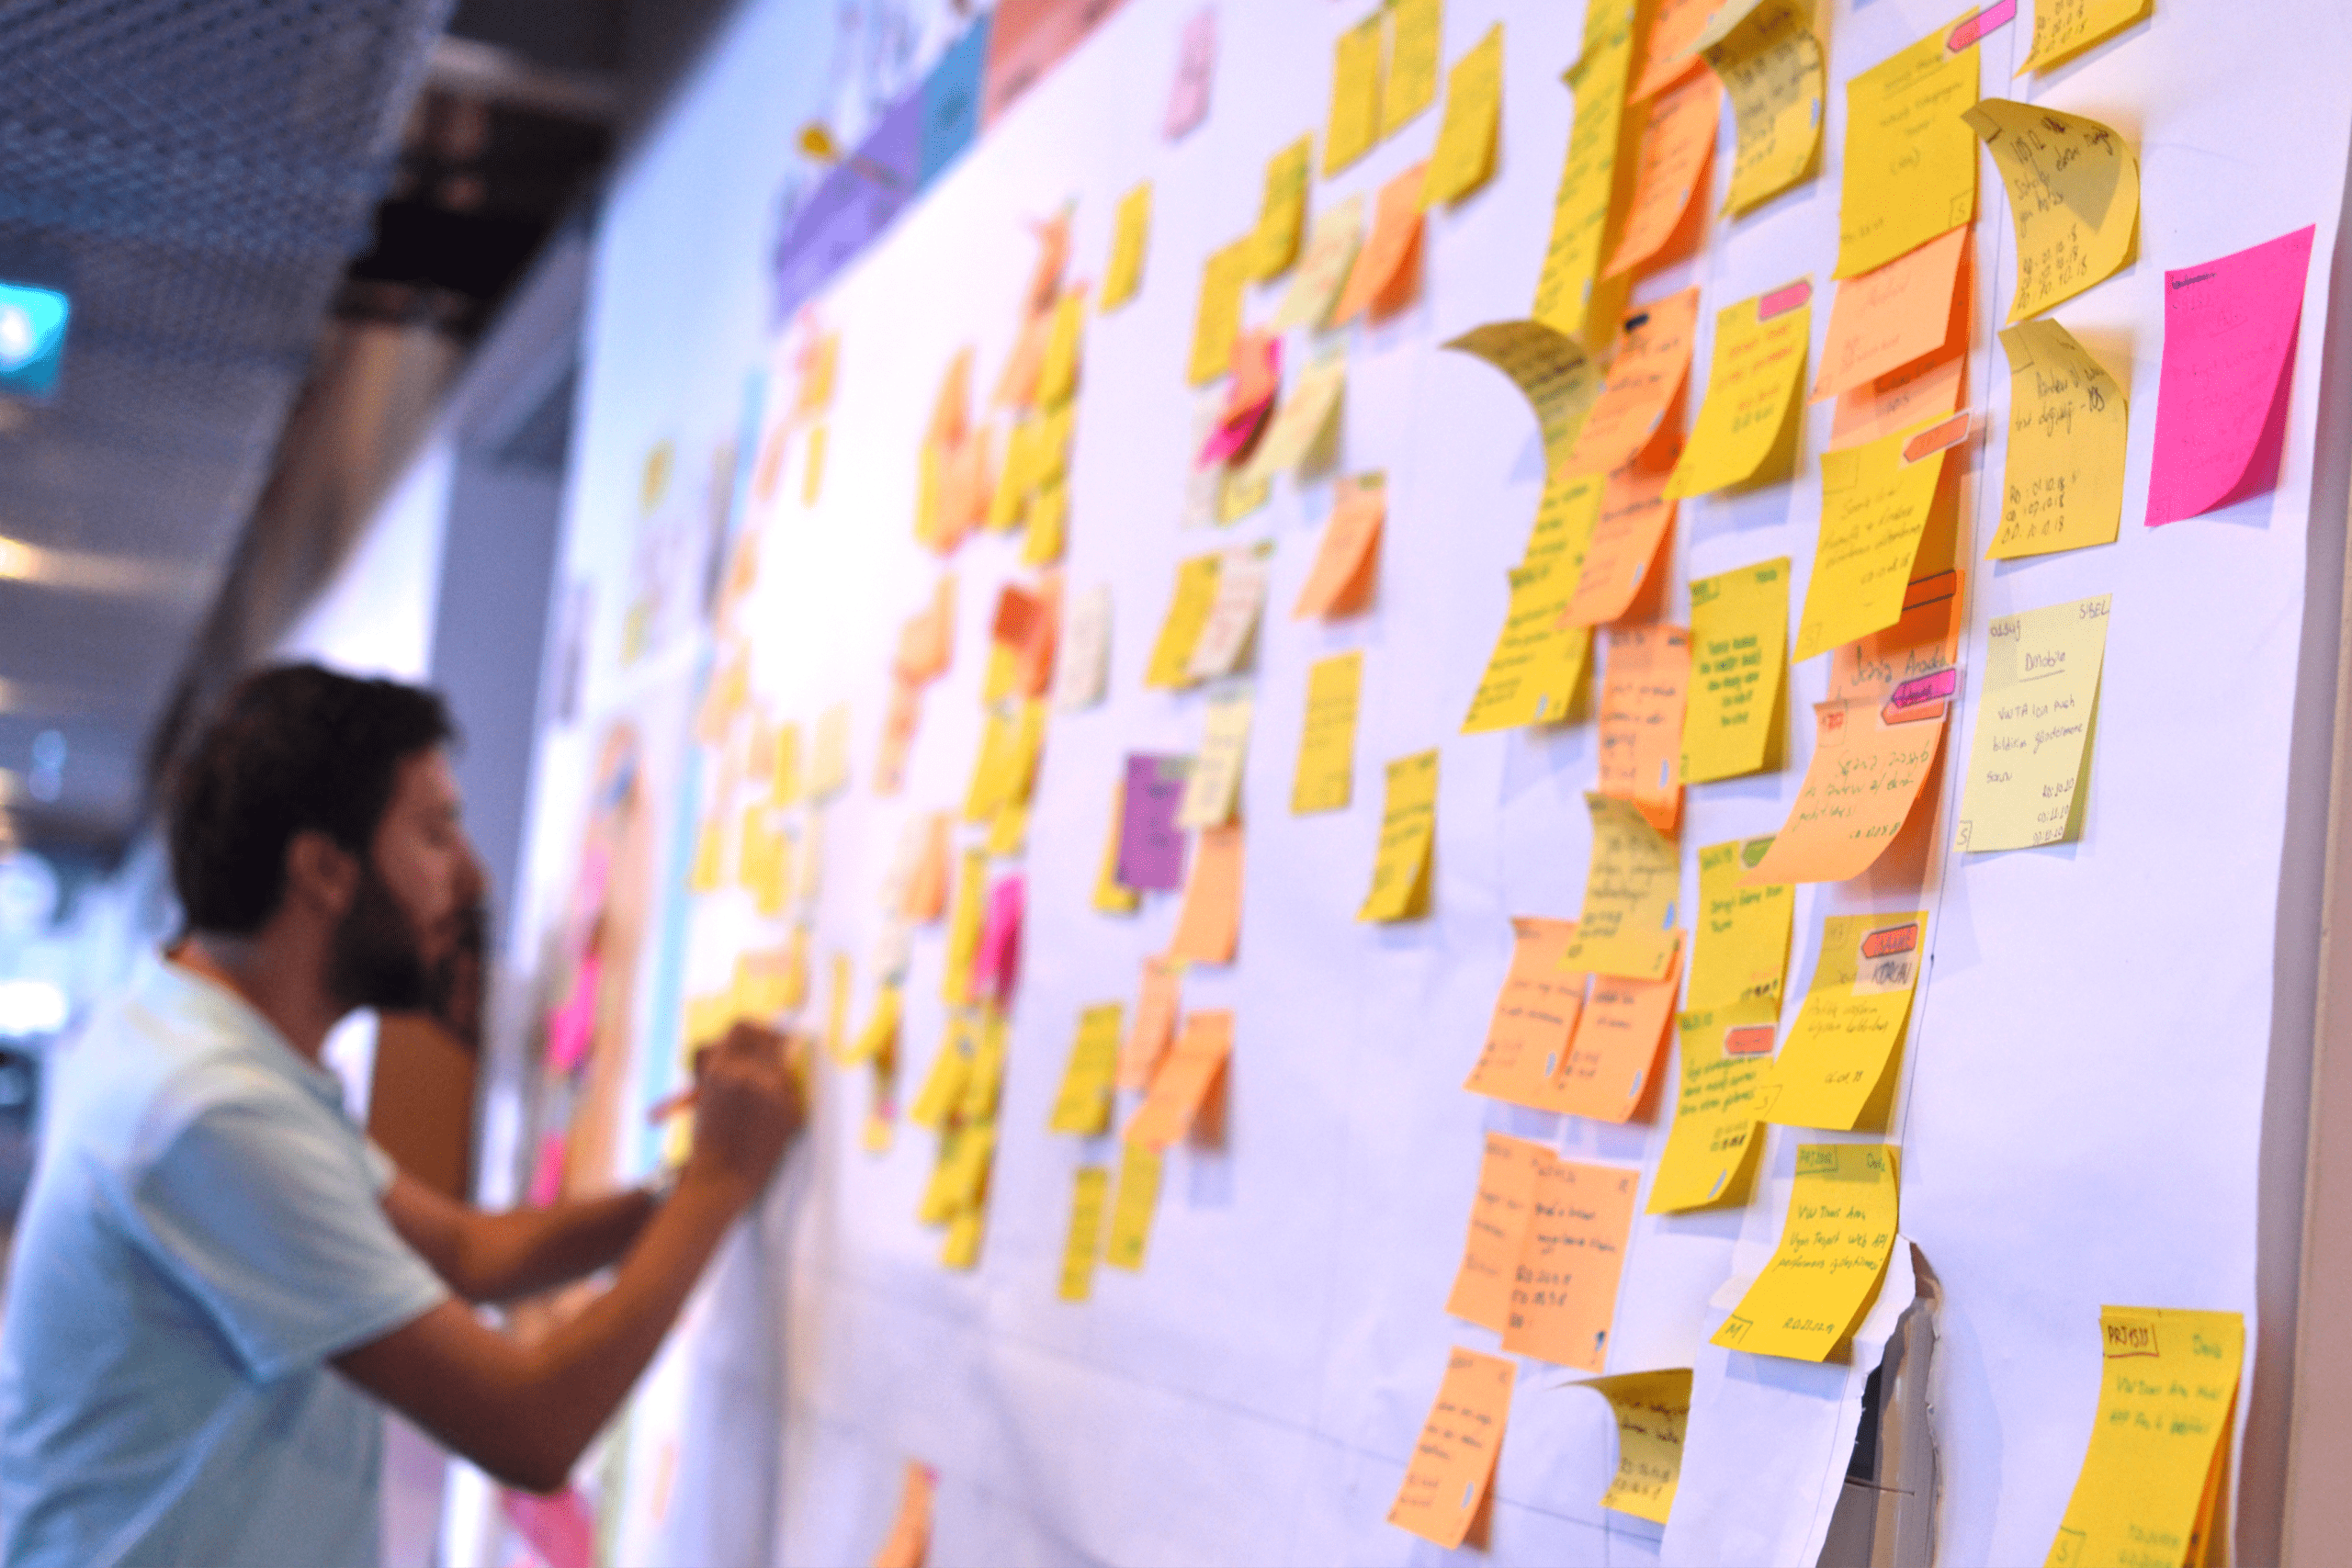 An IT worker tracking his tasks on Kanban board. Using Kanban board for task control is a kind of agile development methodology.